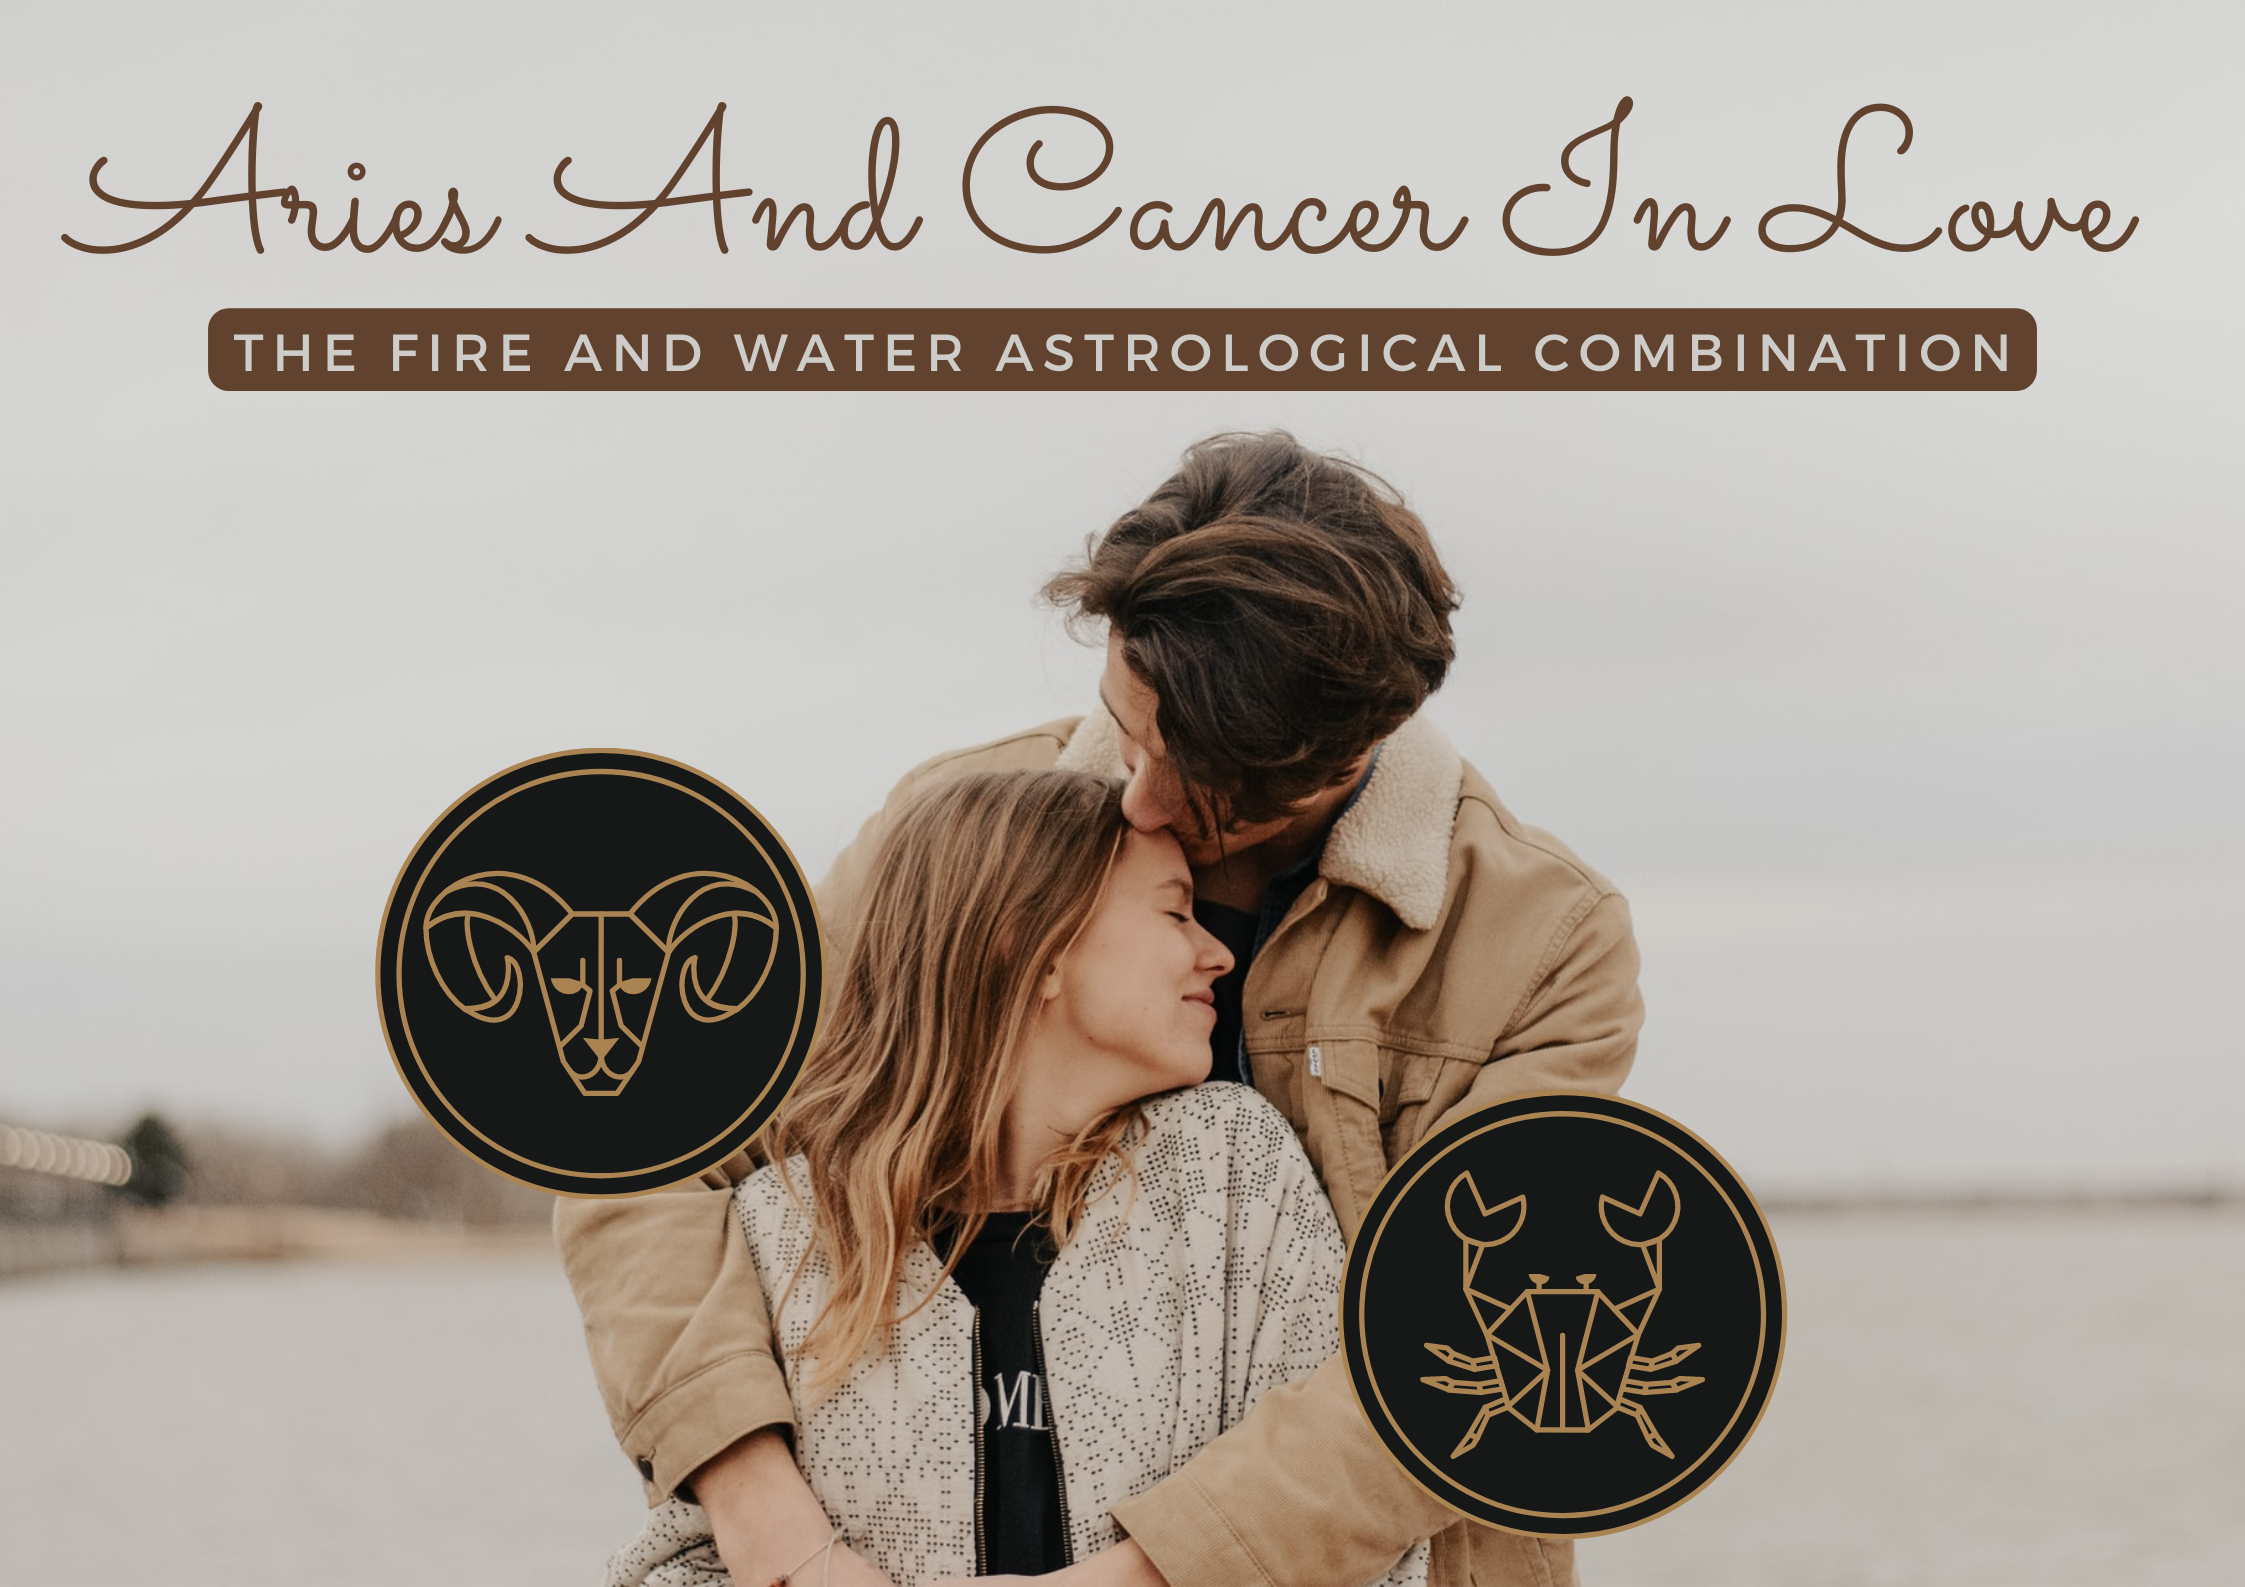 Aries And Cancer In Love - The Fire And Water Astrological Combination